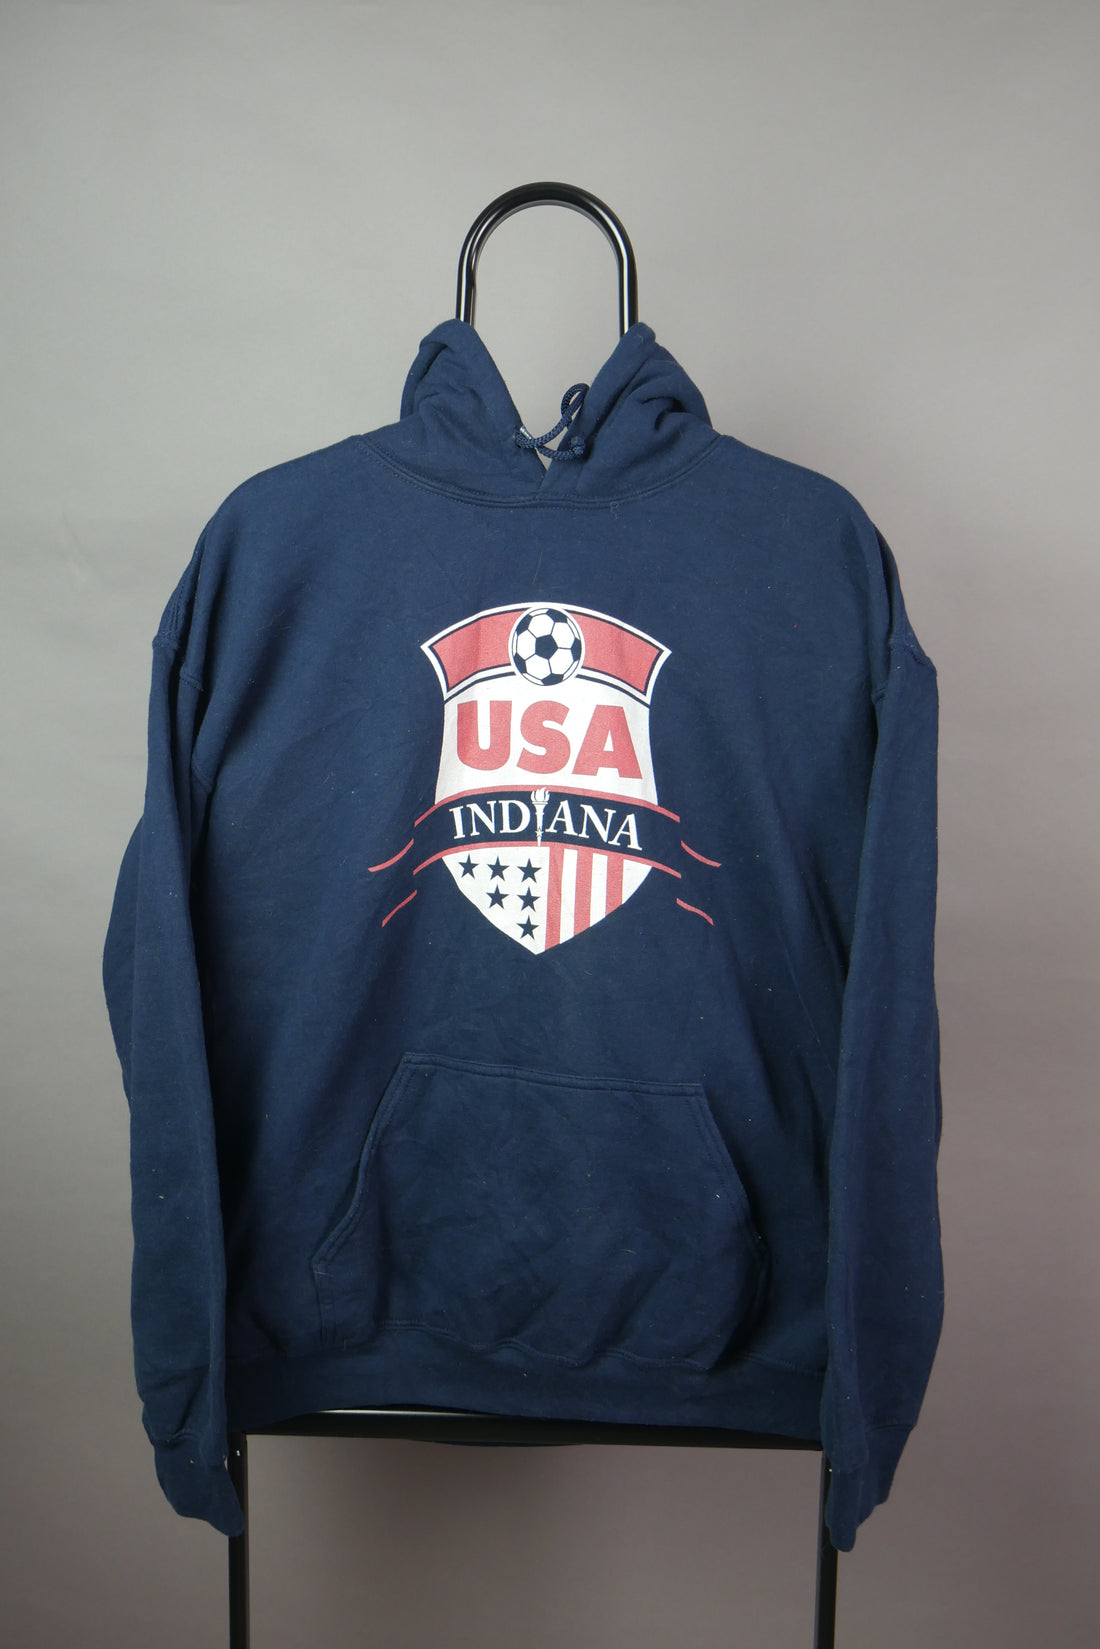 The USA Indiana Graphic Hoodie (L)